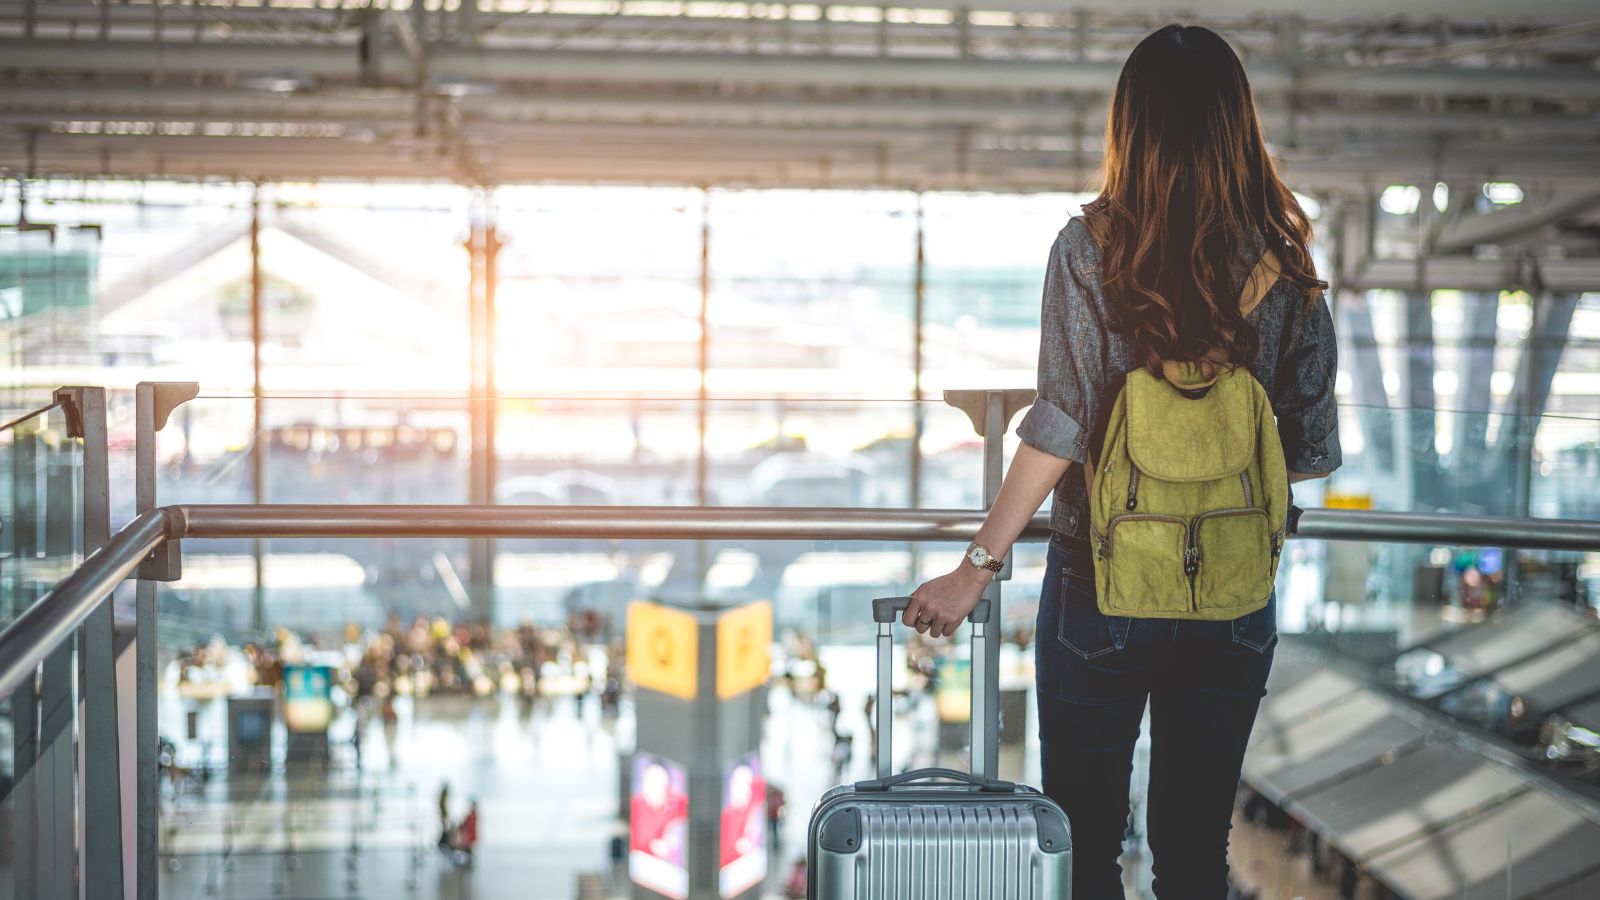 Woman at airport with carry-on luggage (Photo: Shutterstock)